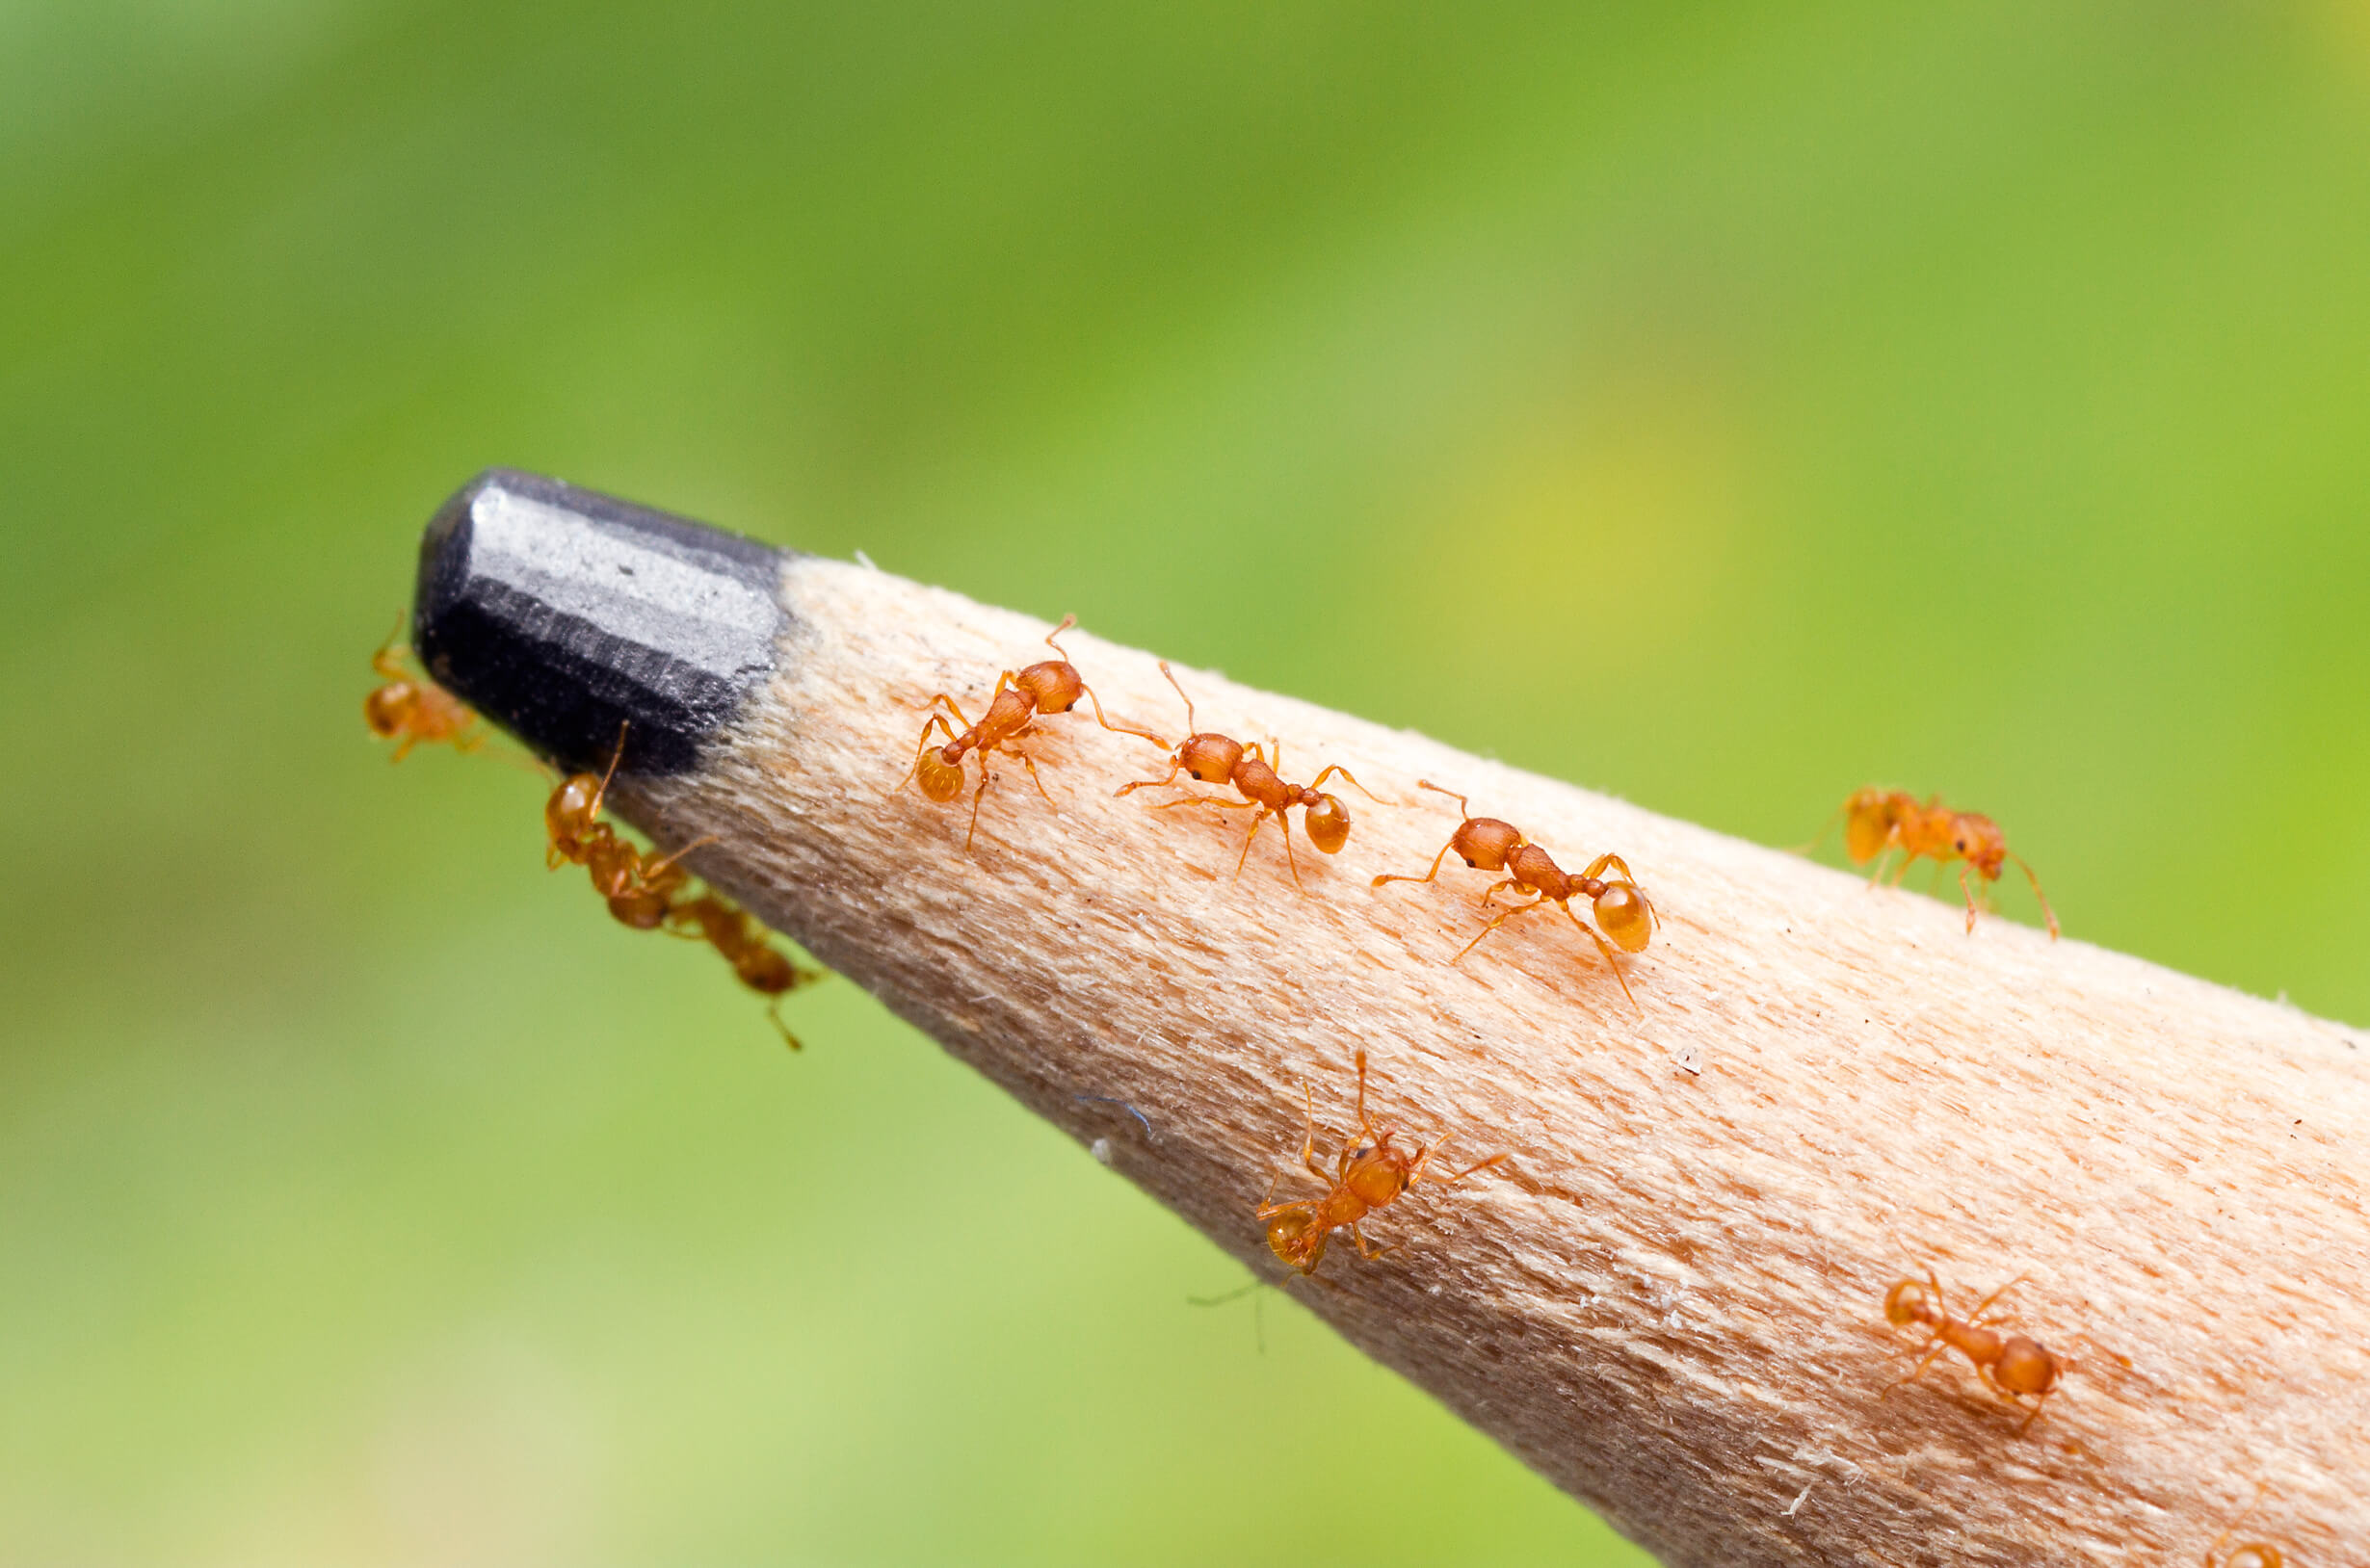 Photo of a pencil tip with nine electric ants to illustrate scale. 